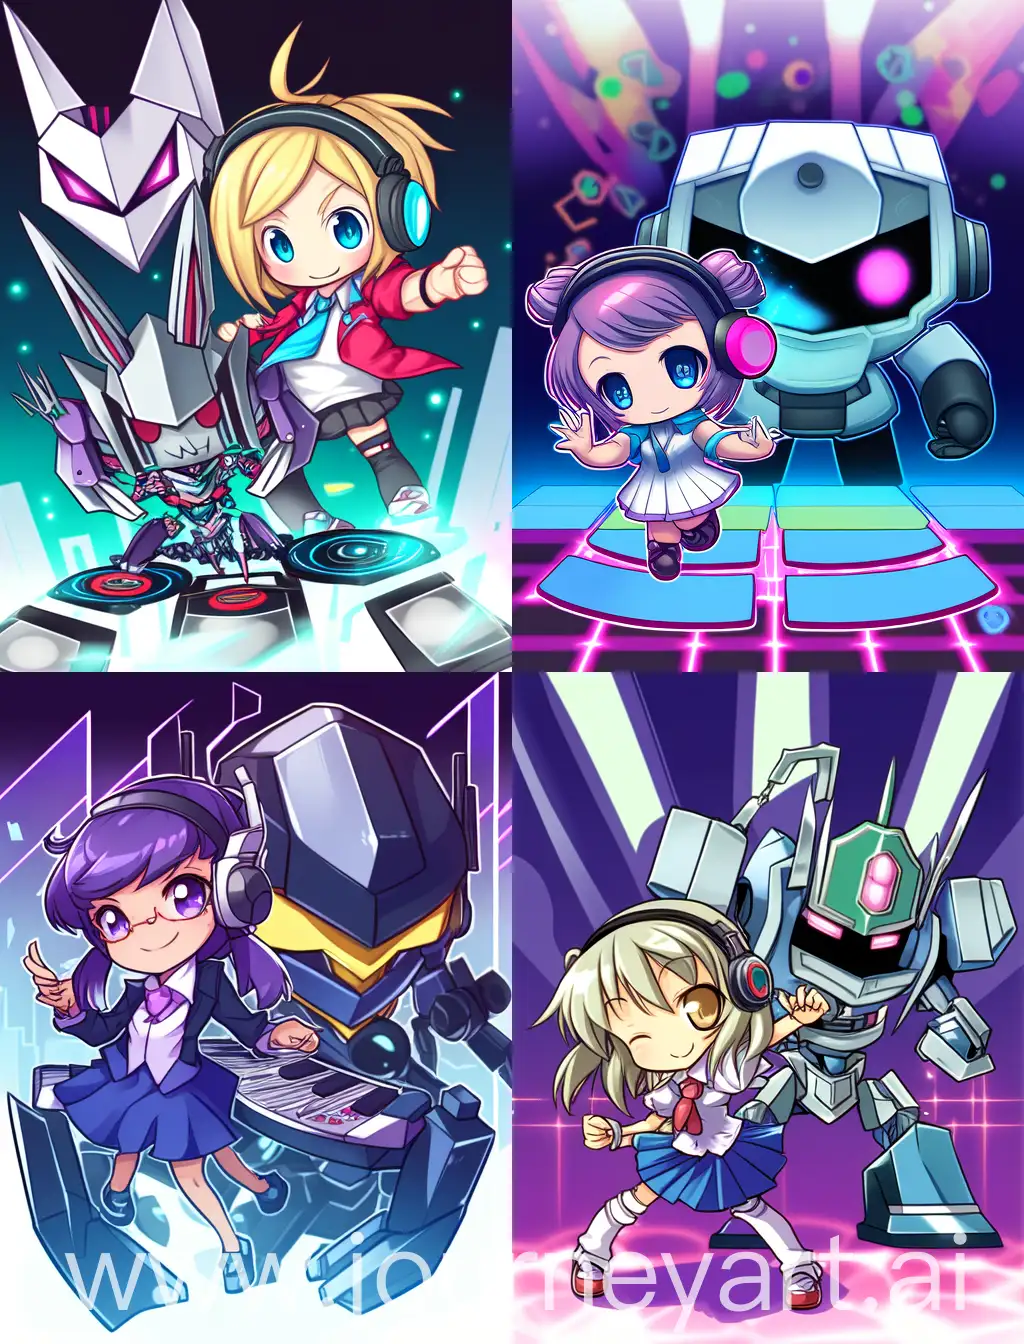 Chibi-Robot-and-Anime-Girl-DJ-Duo-in-Vibrant-Abstract-Setting